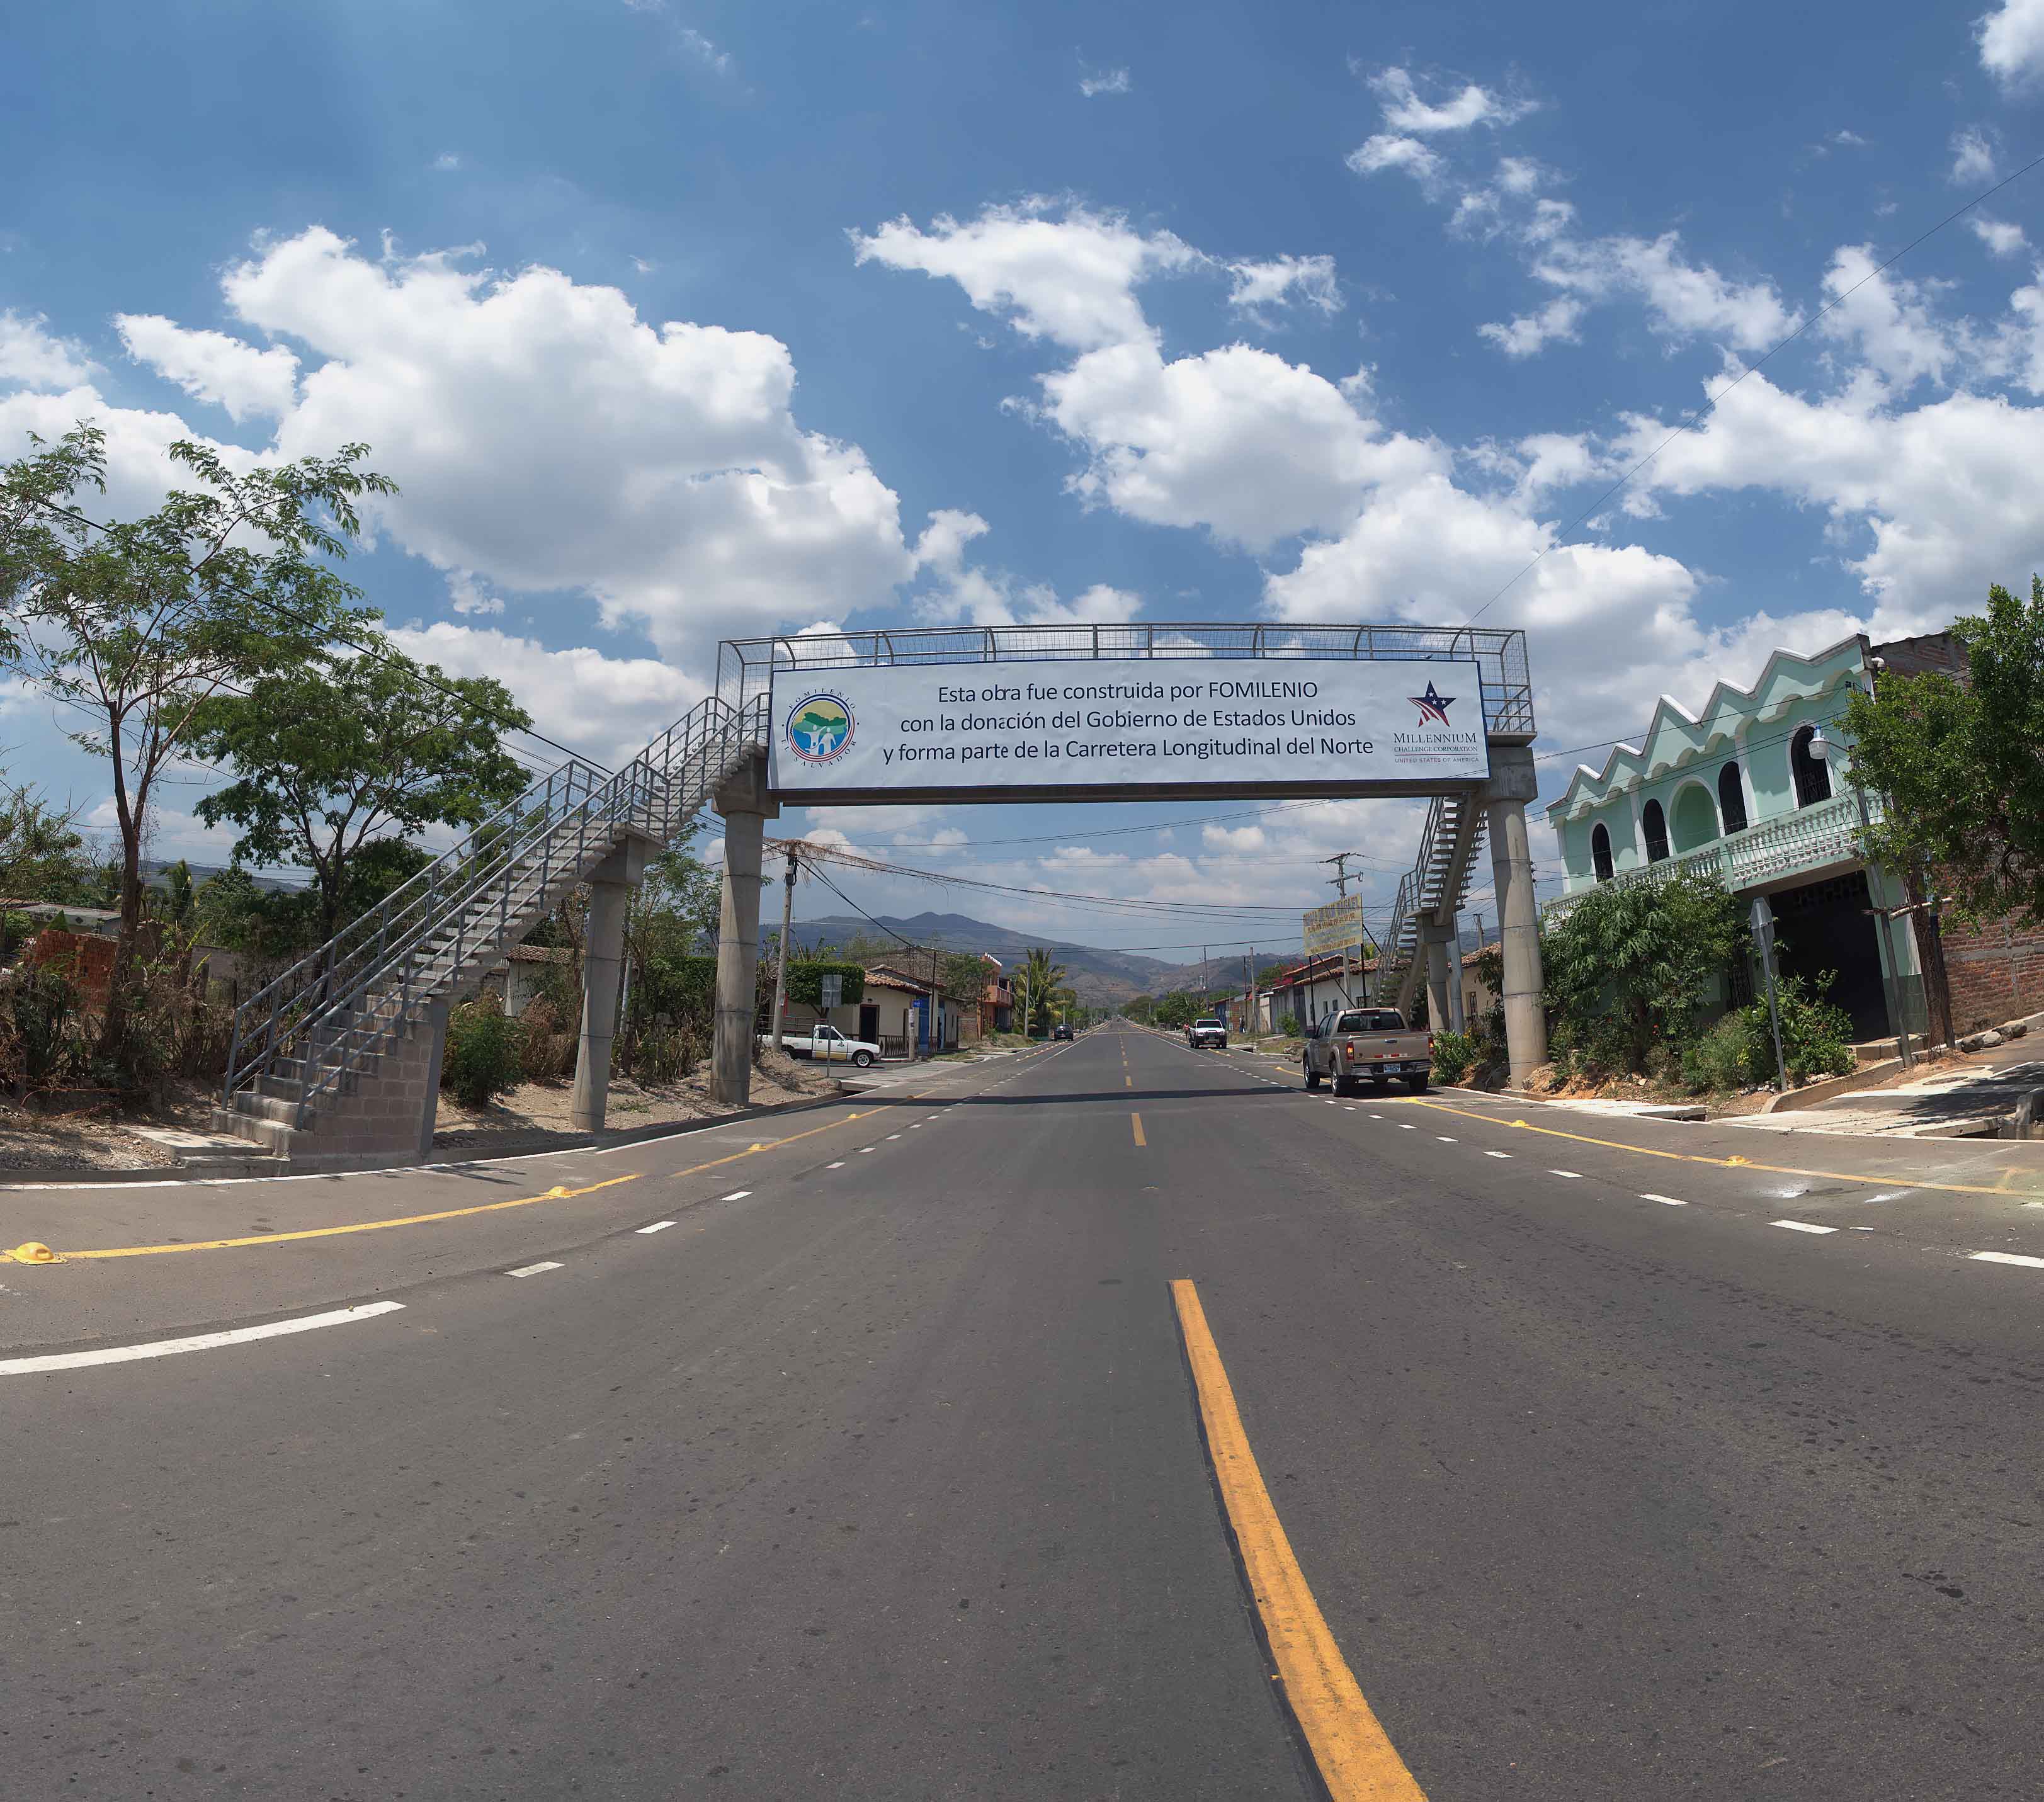 improved section of road with banner of MCC and FOMILENIO logos